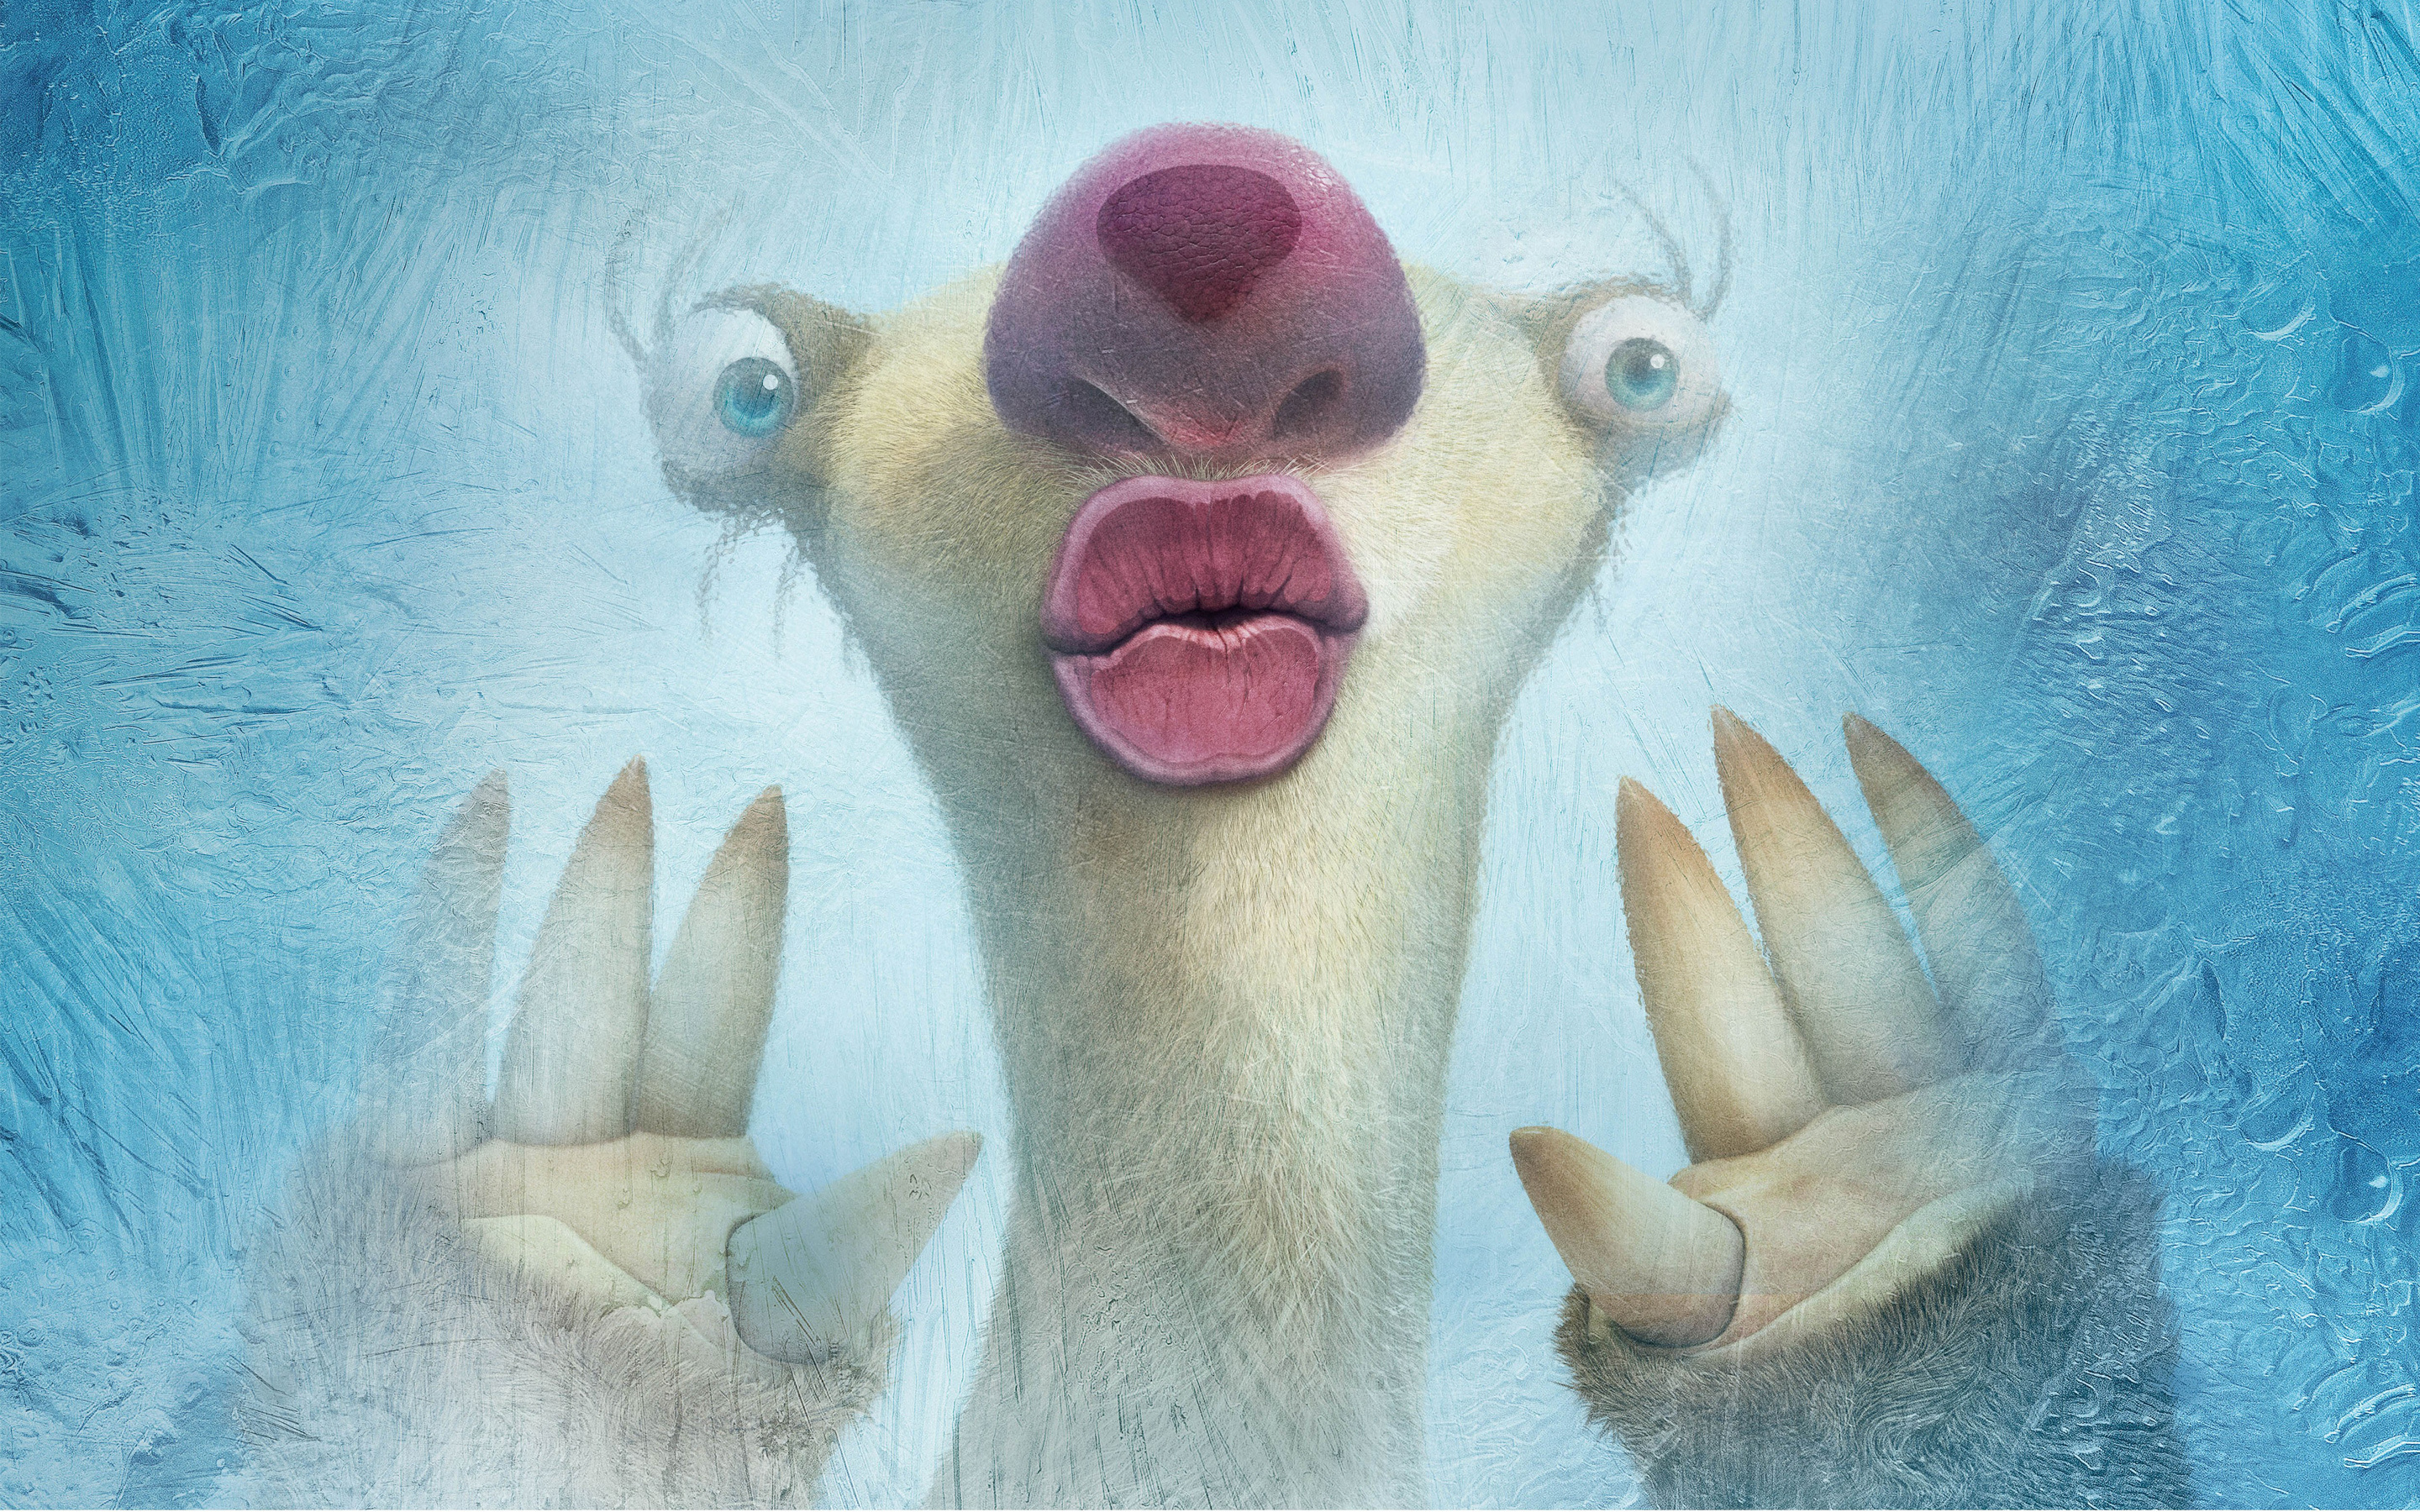 Ice Age 5 Sid, HD movies 4K wallpapers, Beloved characters, Hilarious animations, 2880x1800 HD Desktop